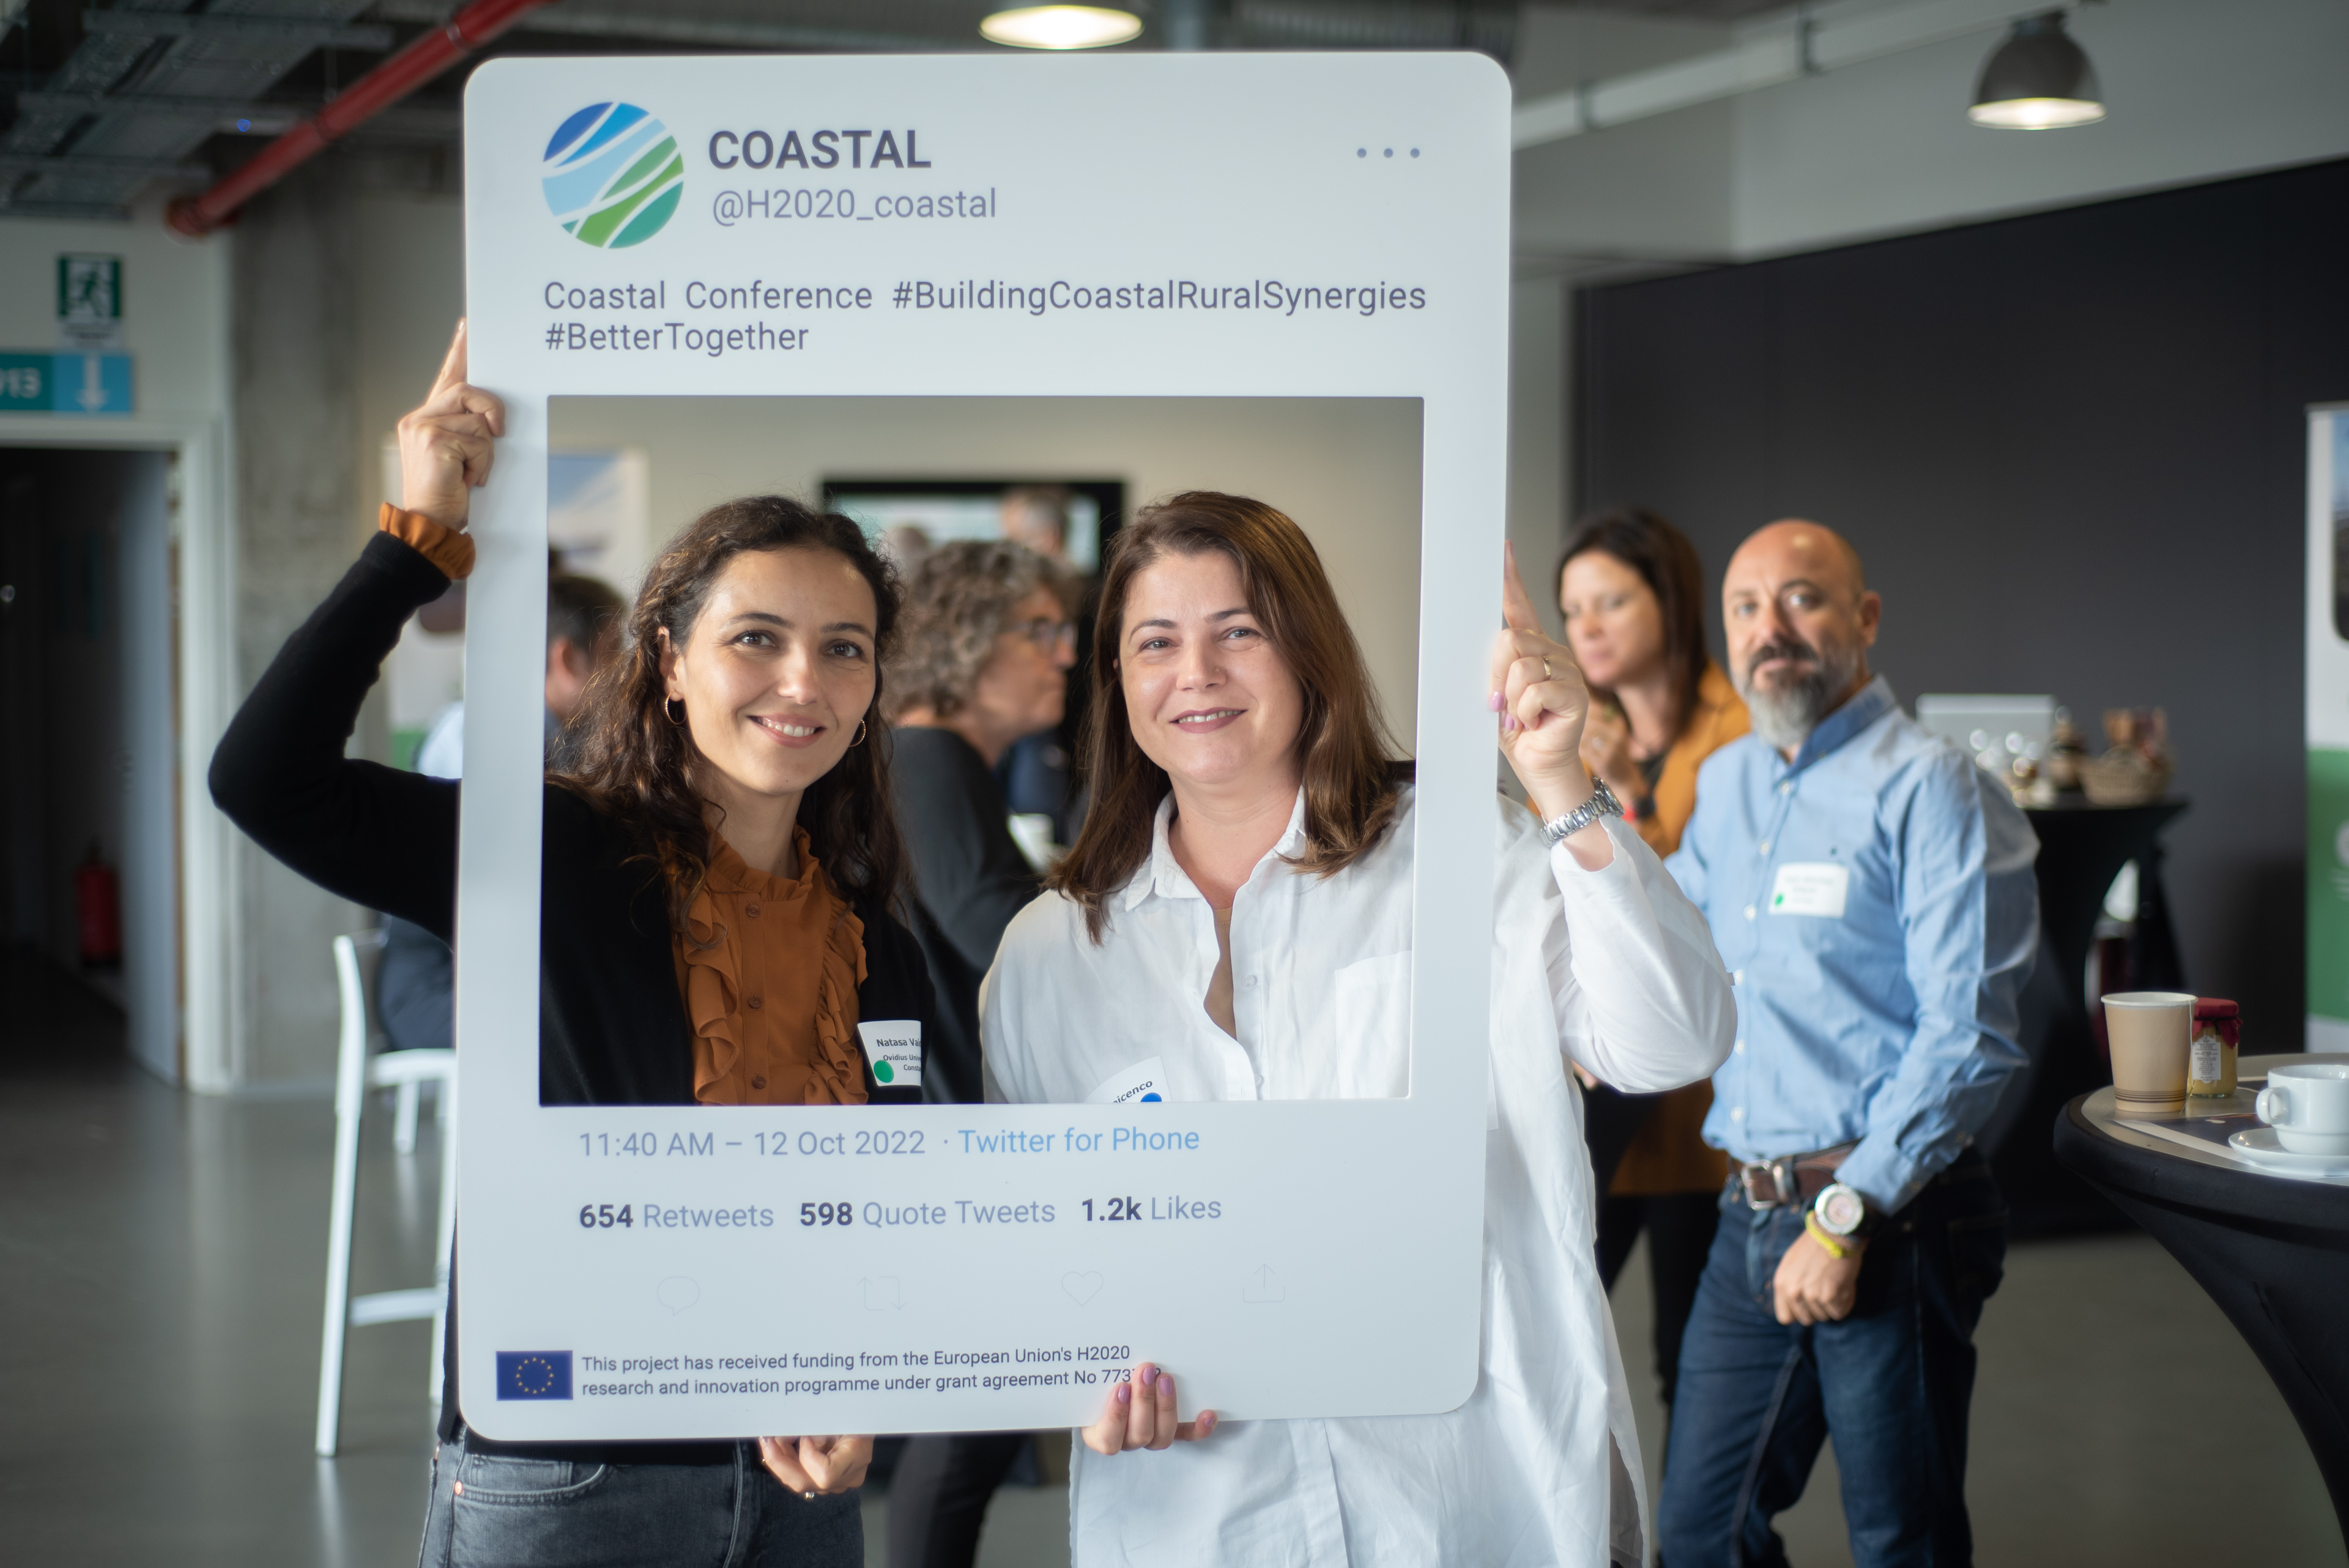 COASTAL FINAL CONFERENCE MULTI-STAKEHOLDER LABS FOR A BETTER FUTURE